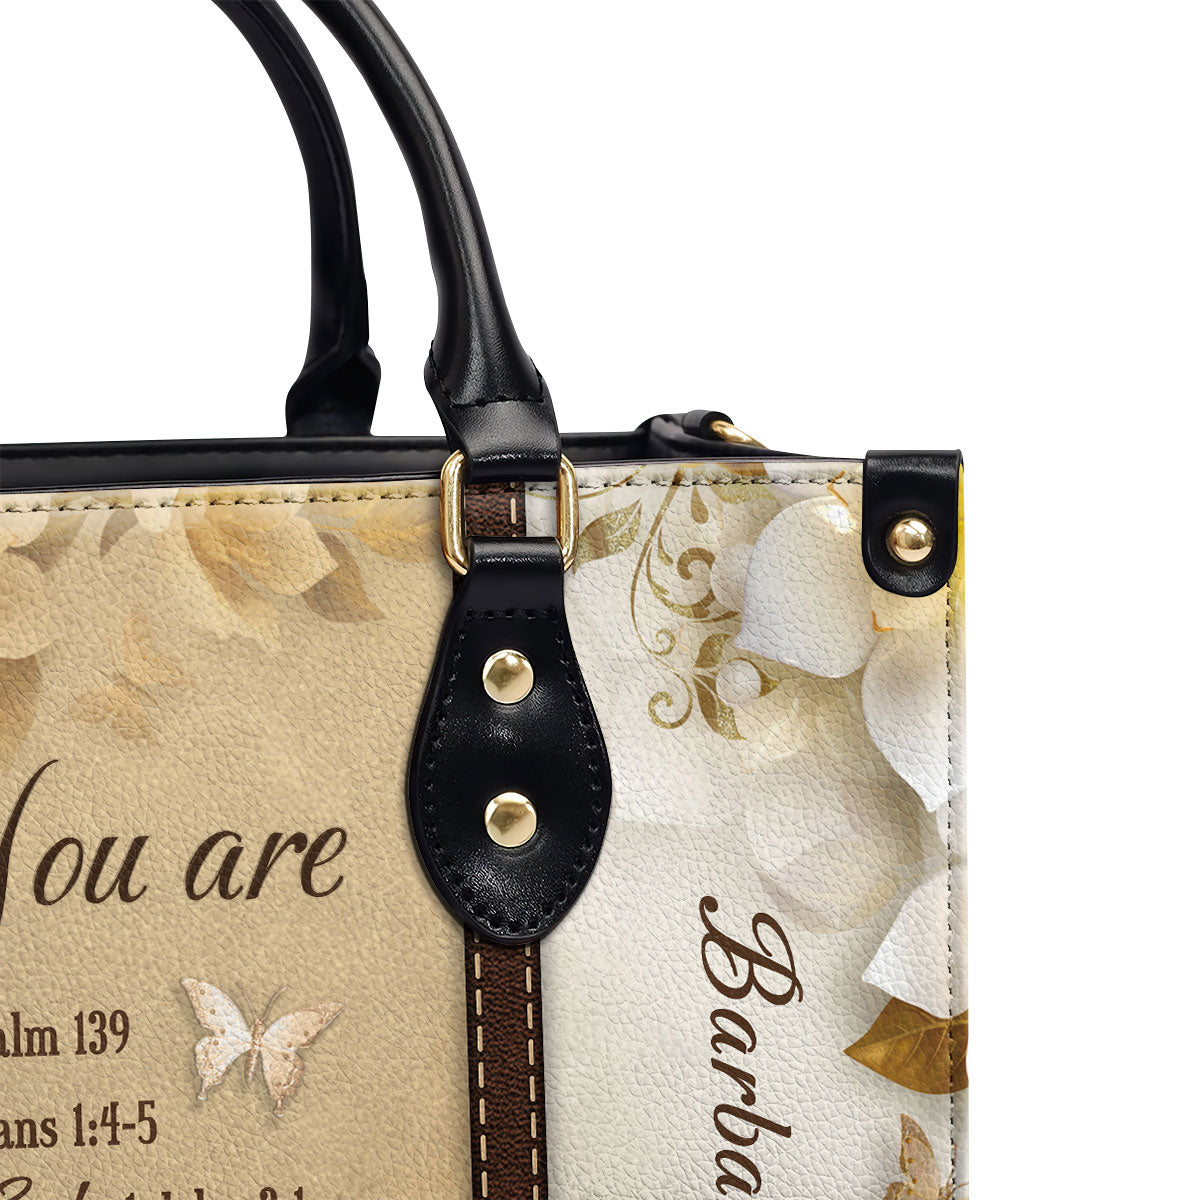 HS COLLECTION Women PU Leather Handbags Flower Embroidered Bags Fashion  Satchel Bags Top Handle